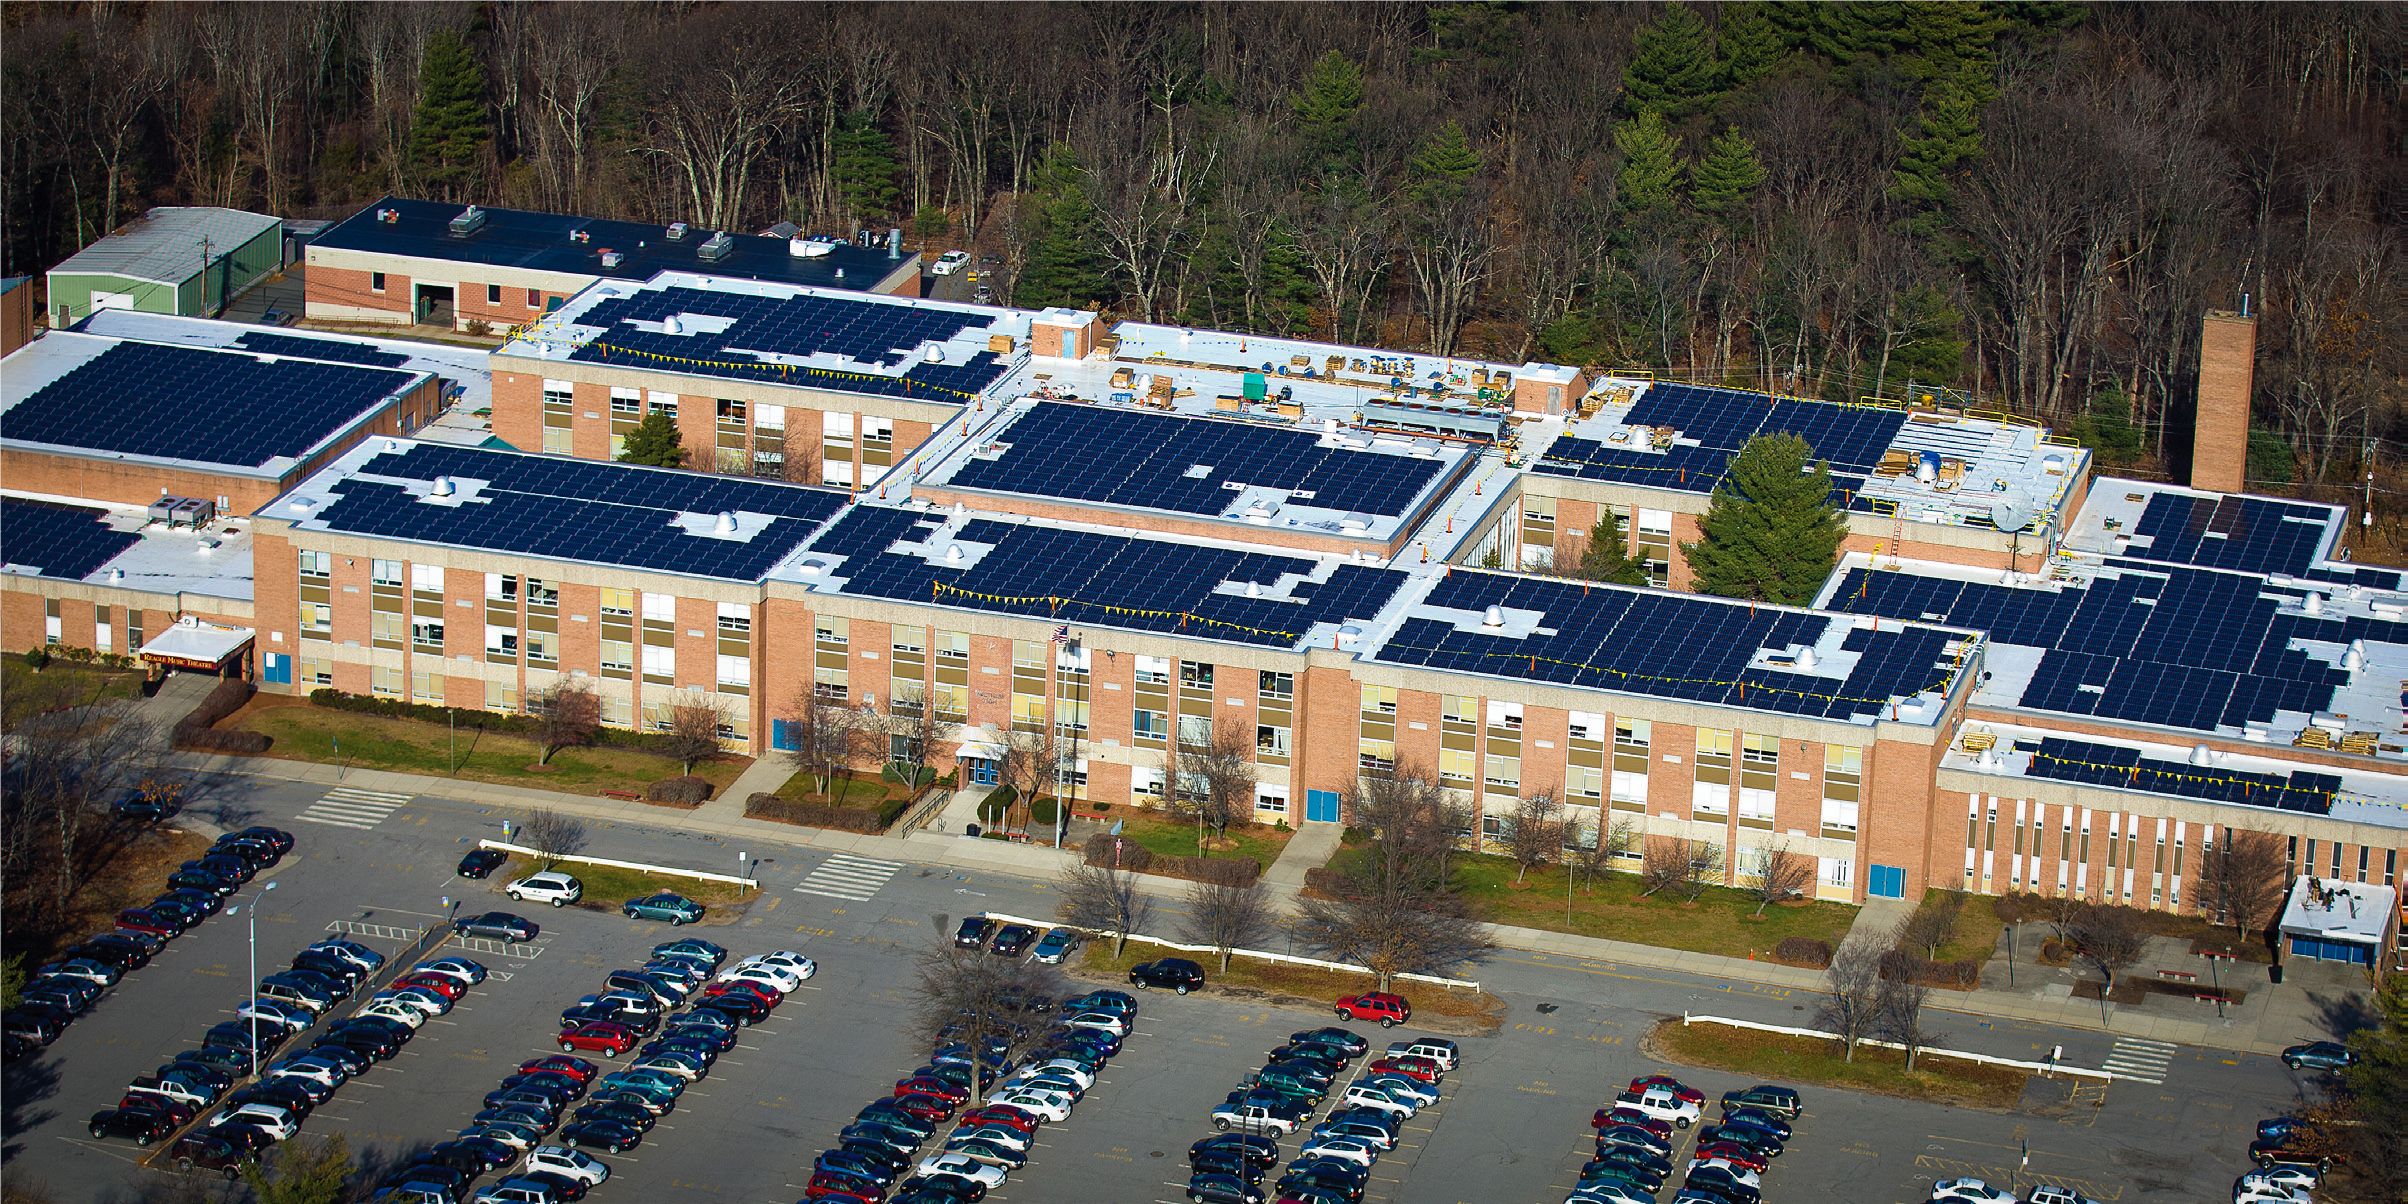 WALTHAM HIGH SCHOOL ROOF-MOUNTED PV SYSTEM